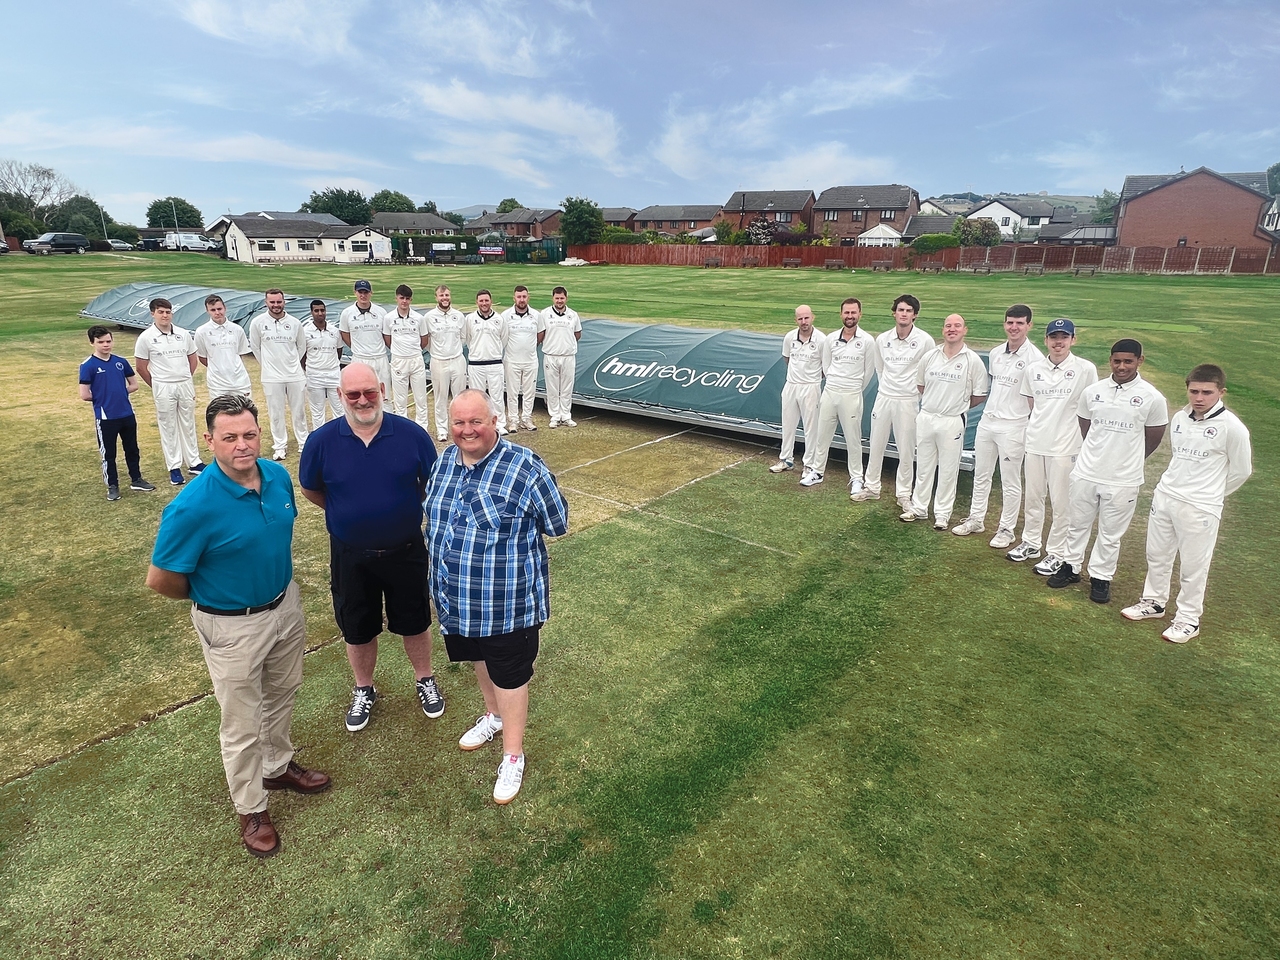 HML Recycling agree £5,000 deal to sponsor wicket covers at local cricket club